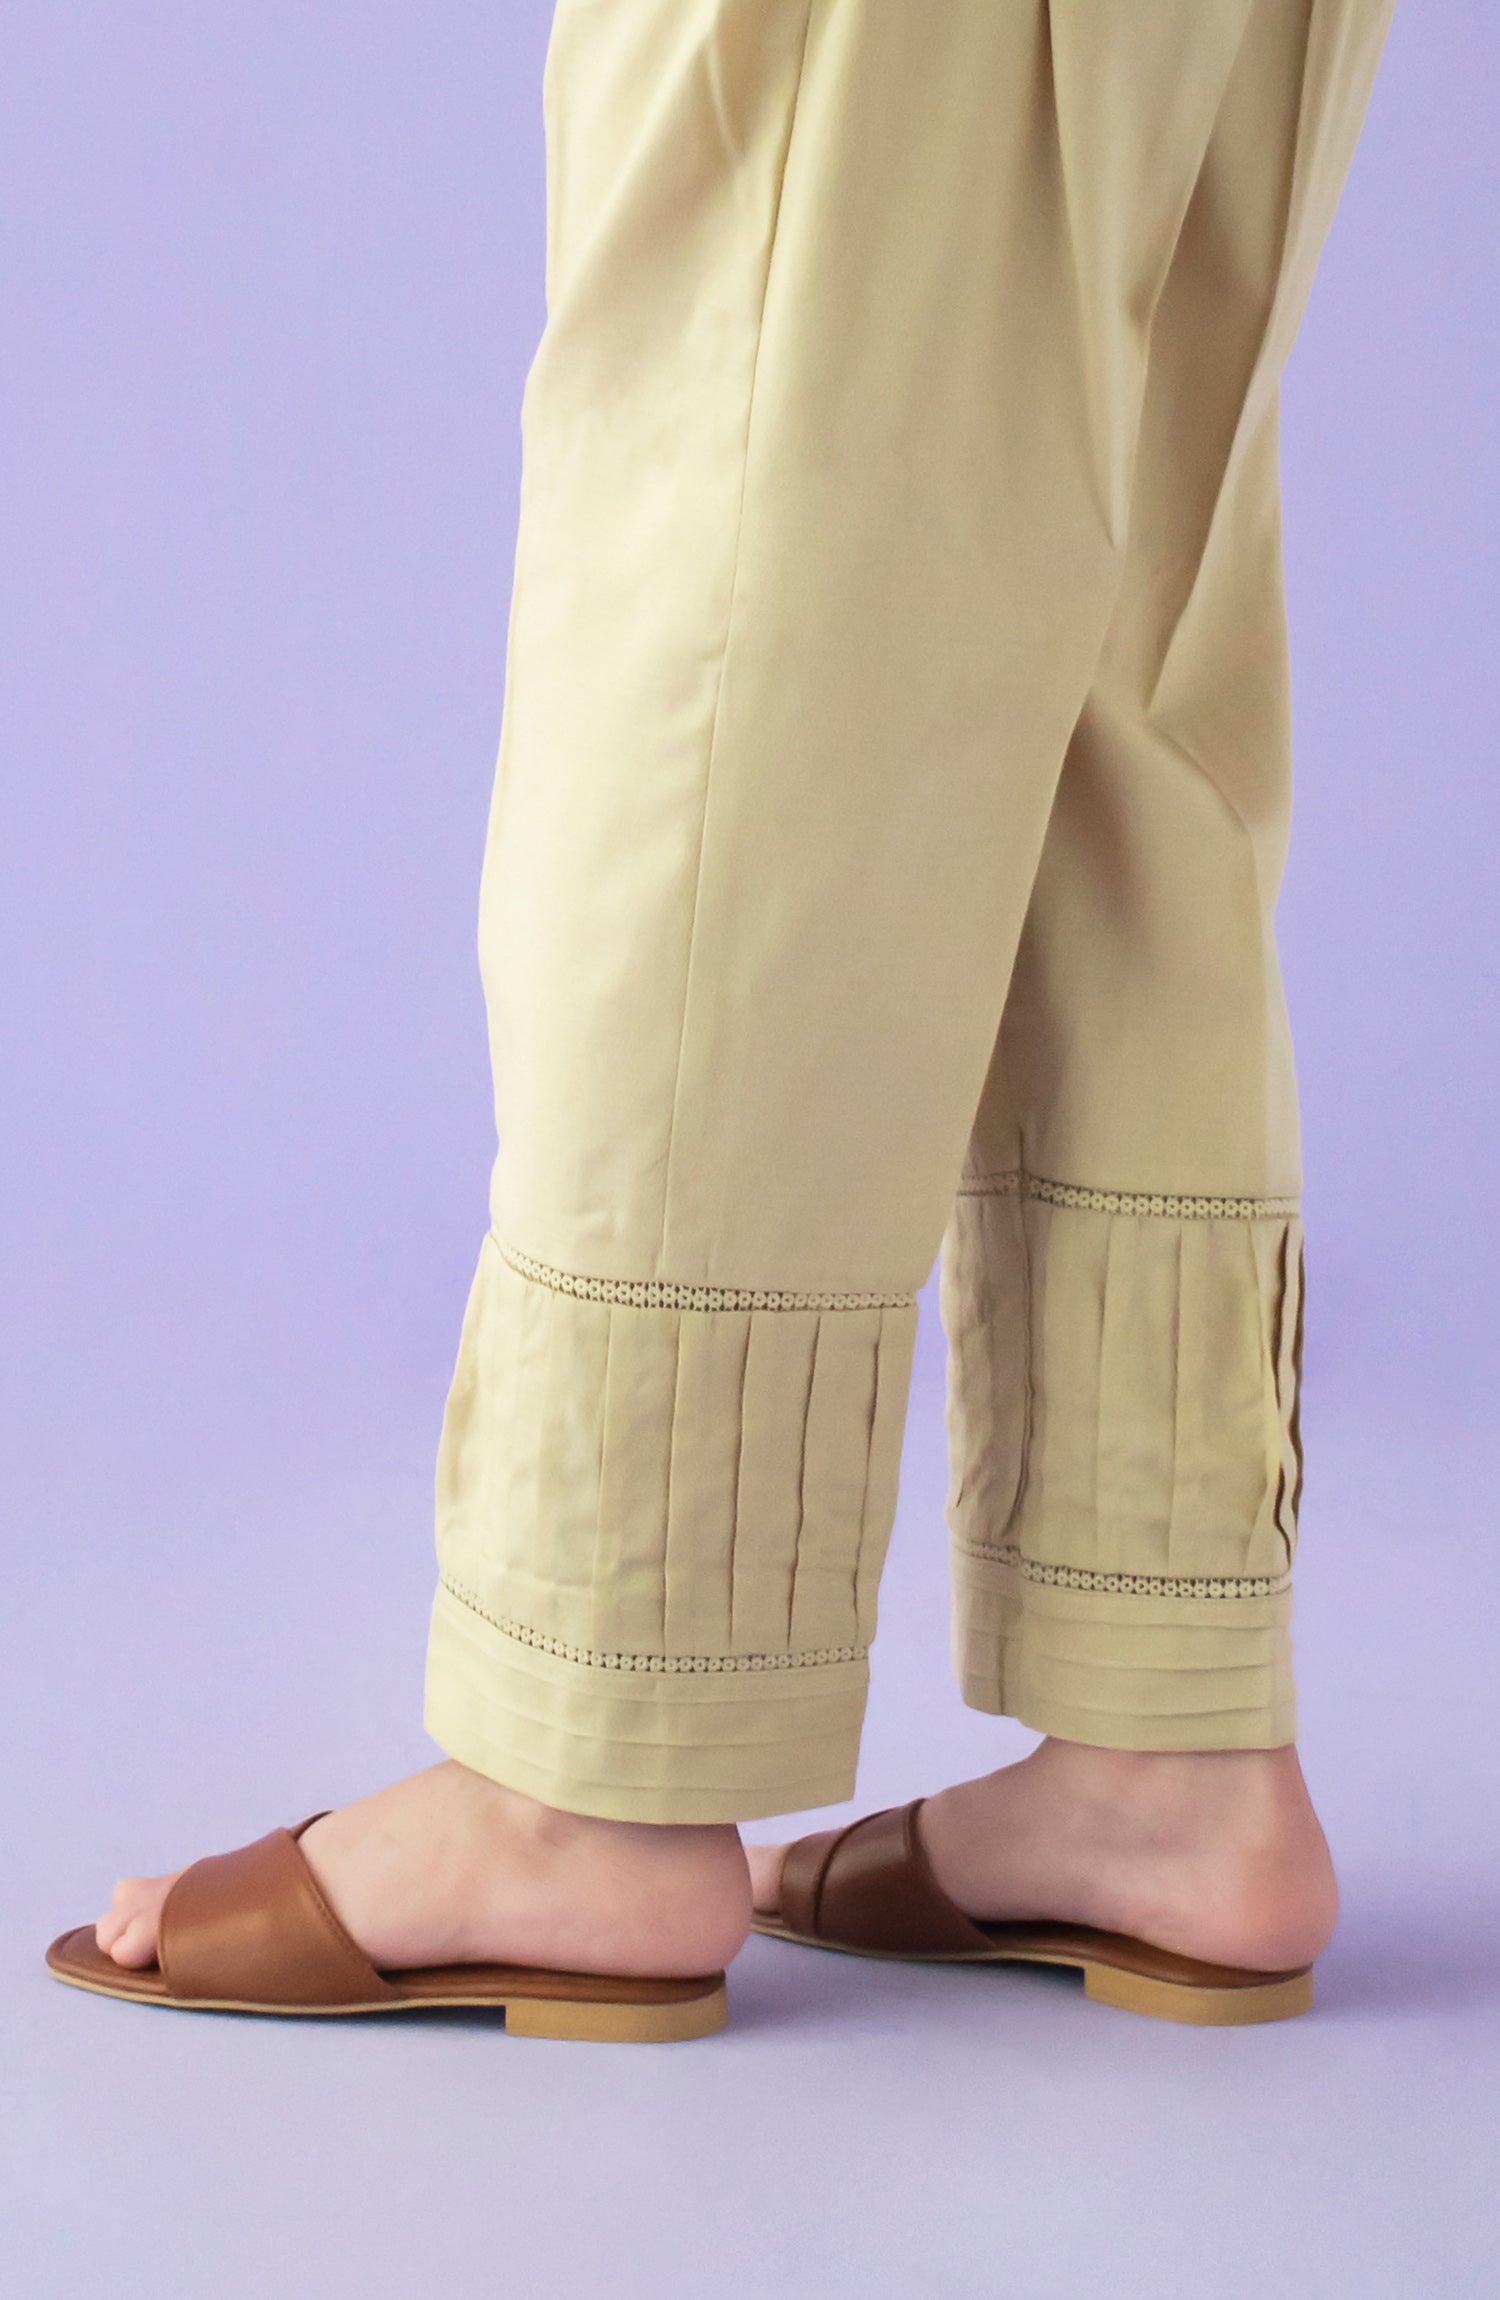 NB-T-PL-23-004 BEIGE DOBBY SCTROUSER STITCHED BOTTOMS TROUSER